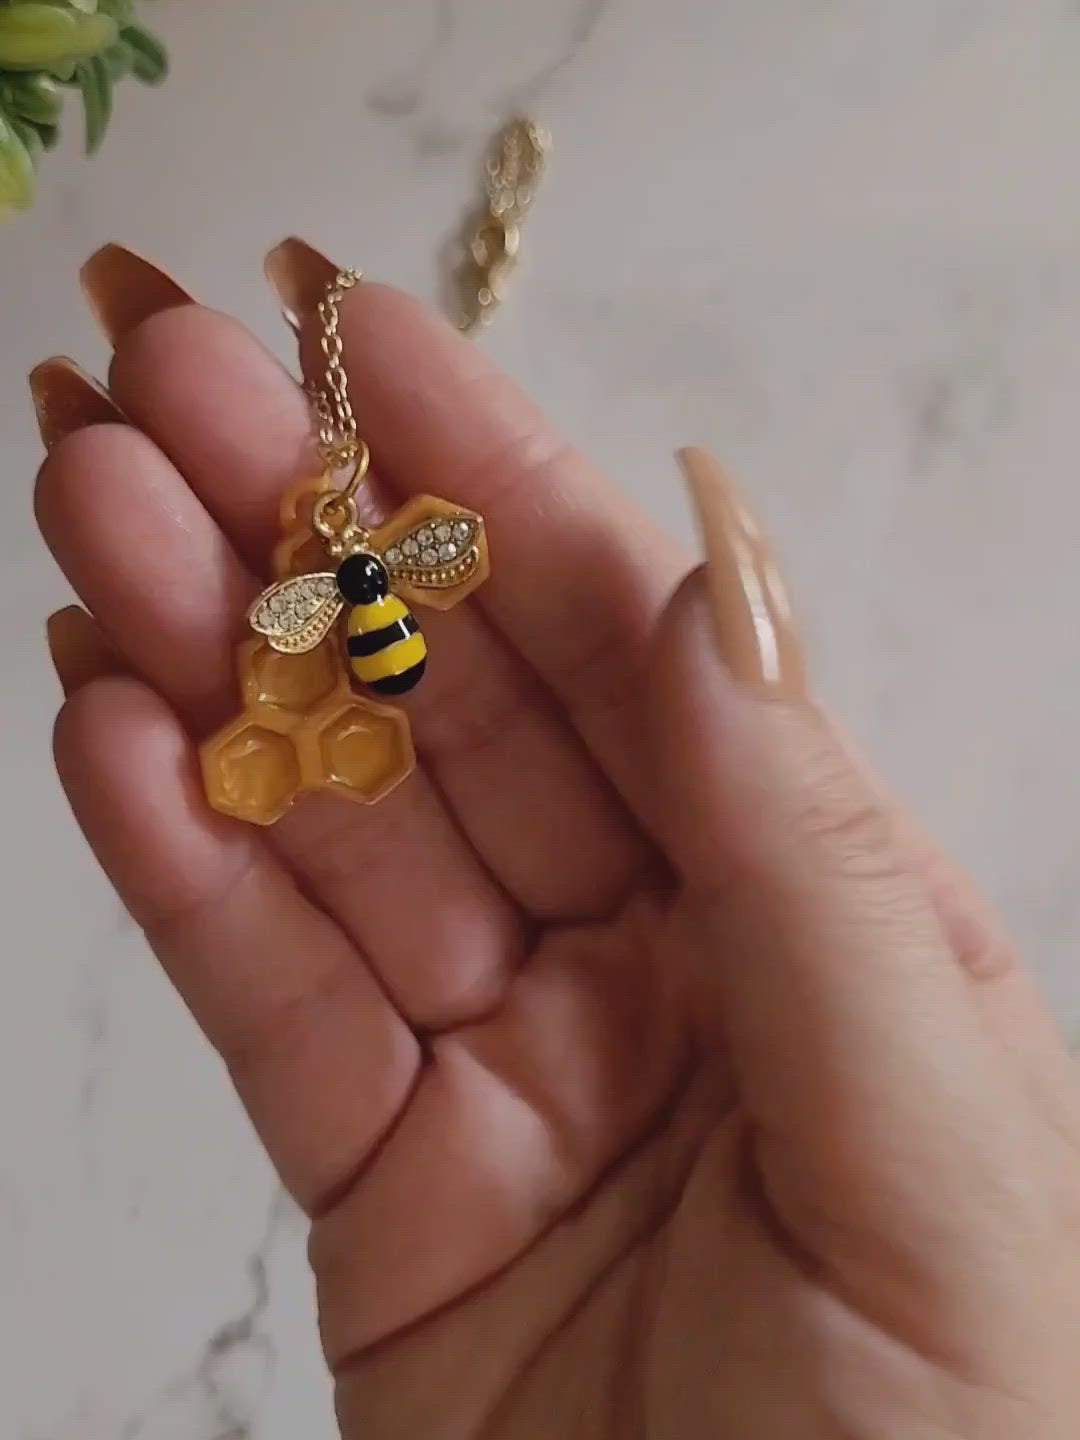 Closeup of honeycomb shaped resin necklace with bee charm in a hand to show size and color details. 